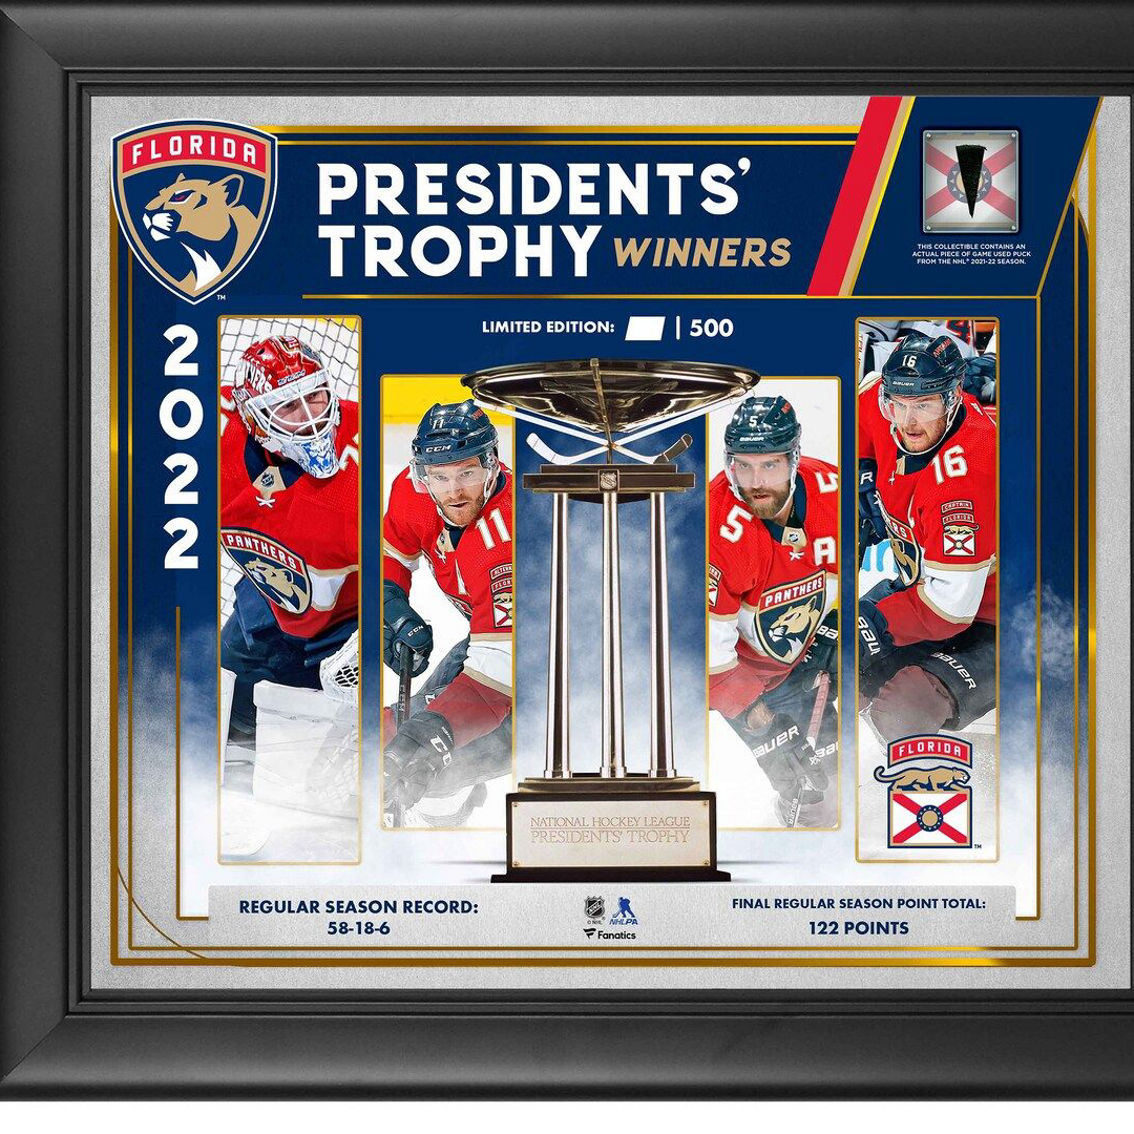 Fanatics Authentic Florida Panthers 2022 Presidents' Trophy Winners 15'' x 17'' Collage with a Piece of Game-Used Puck - Limited Edition of 500 - Image 2 of 2